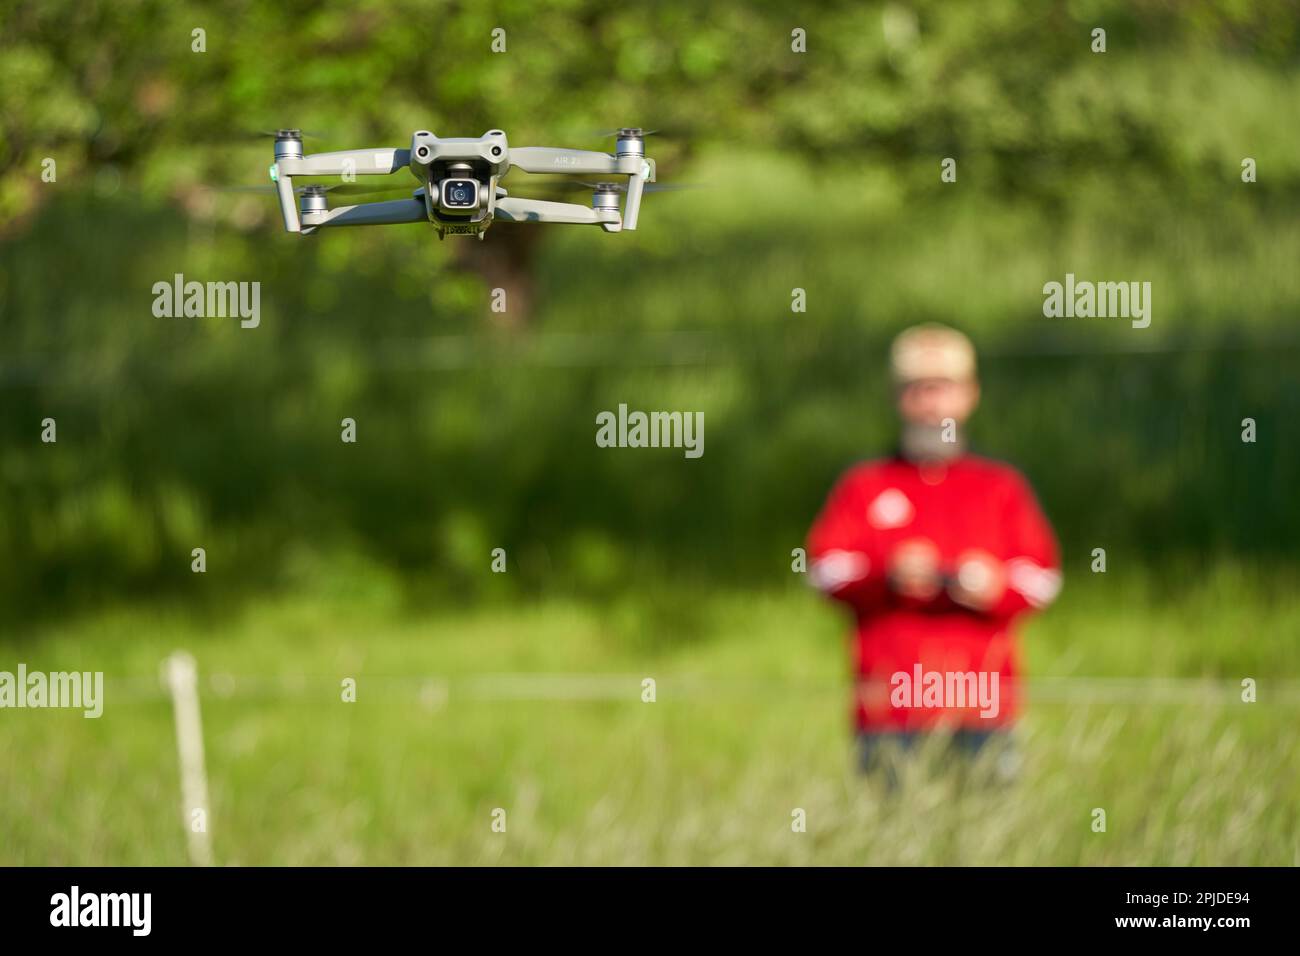 Nürtingen, Germany - May 29, 2021: Newest drone from manufacturer dji. Quadcopter air 2s with extensive photo and video functions. Safety systems such Stock Photo